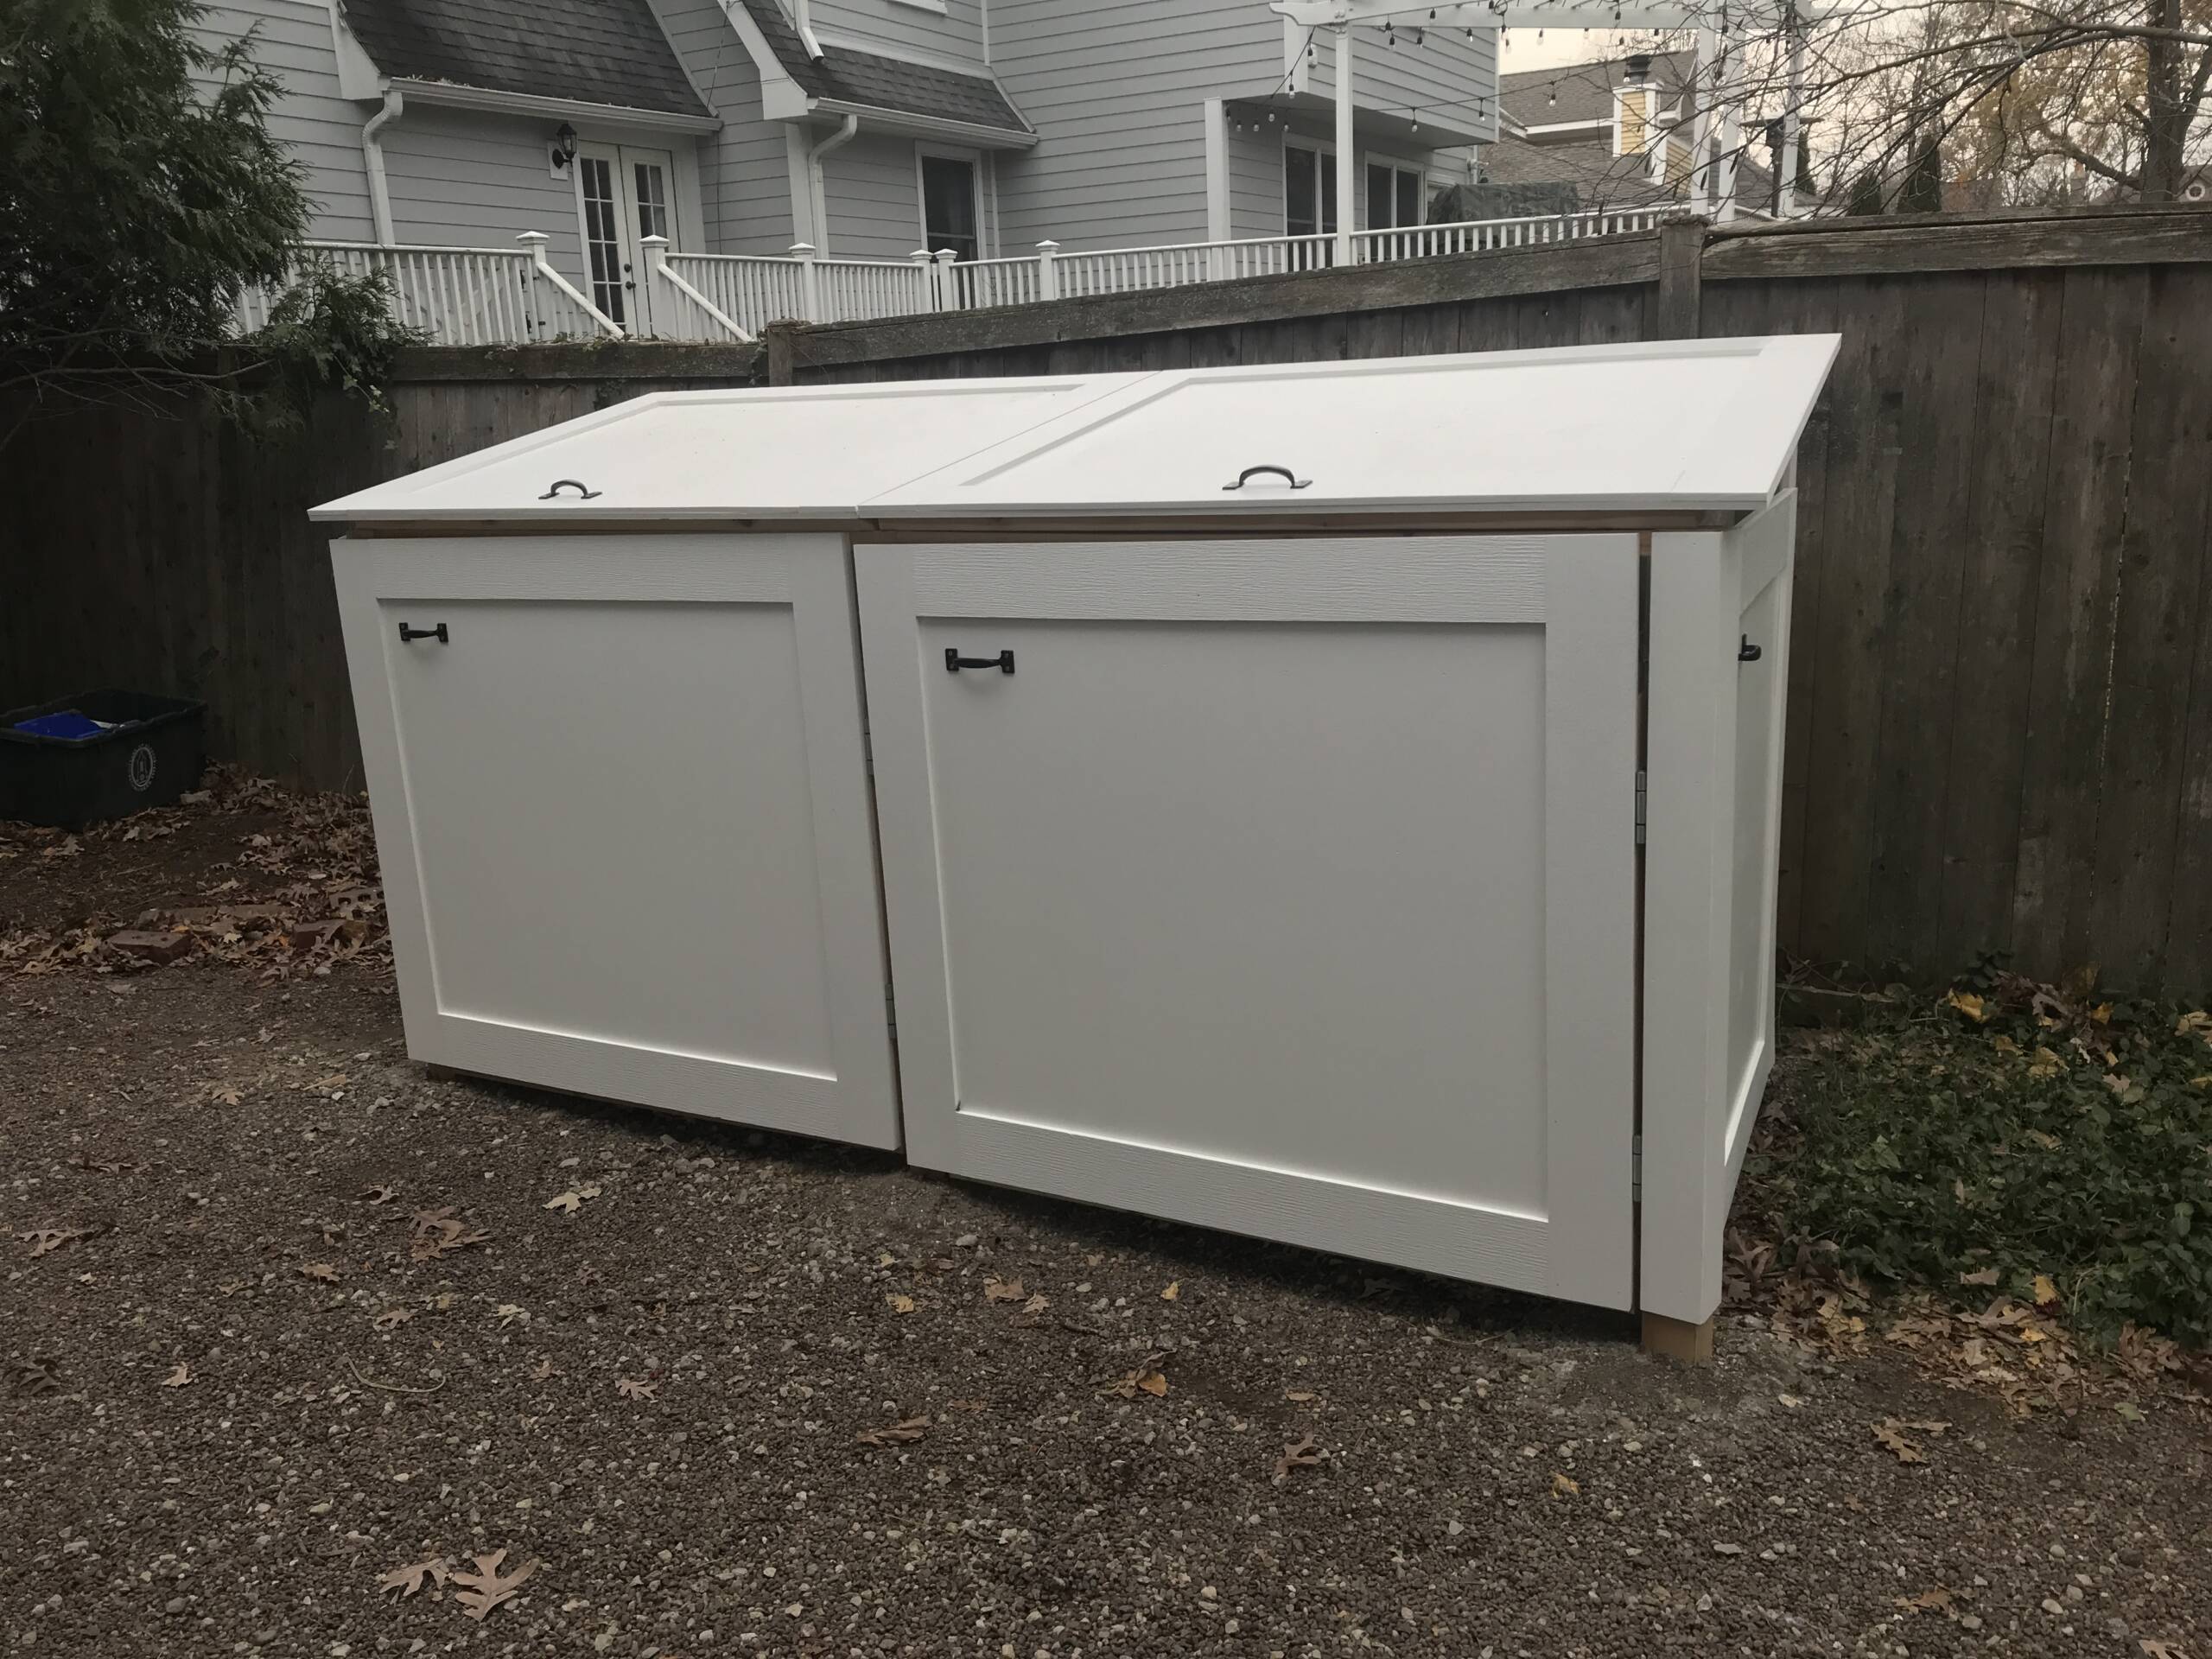 A new shed for the trashcans